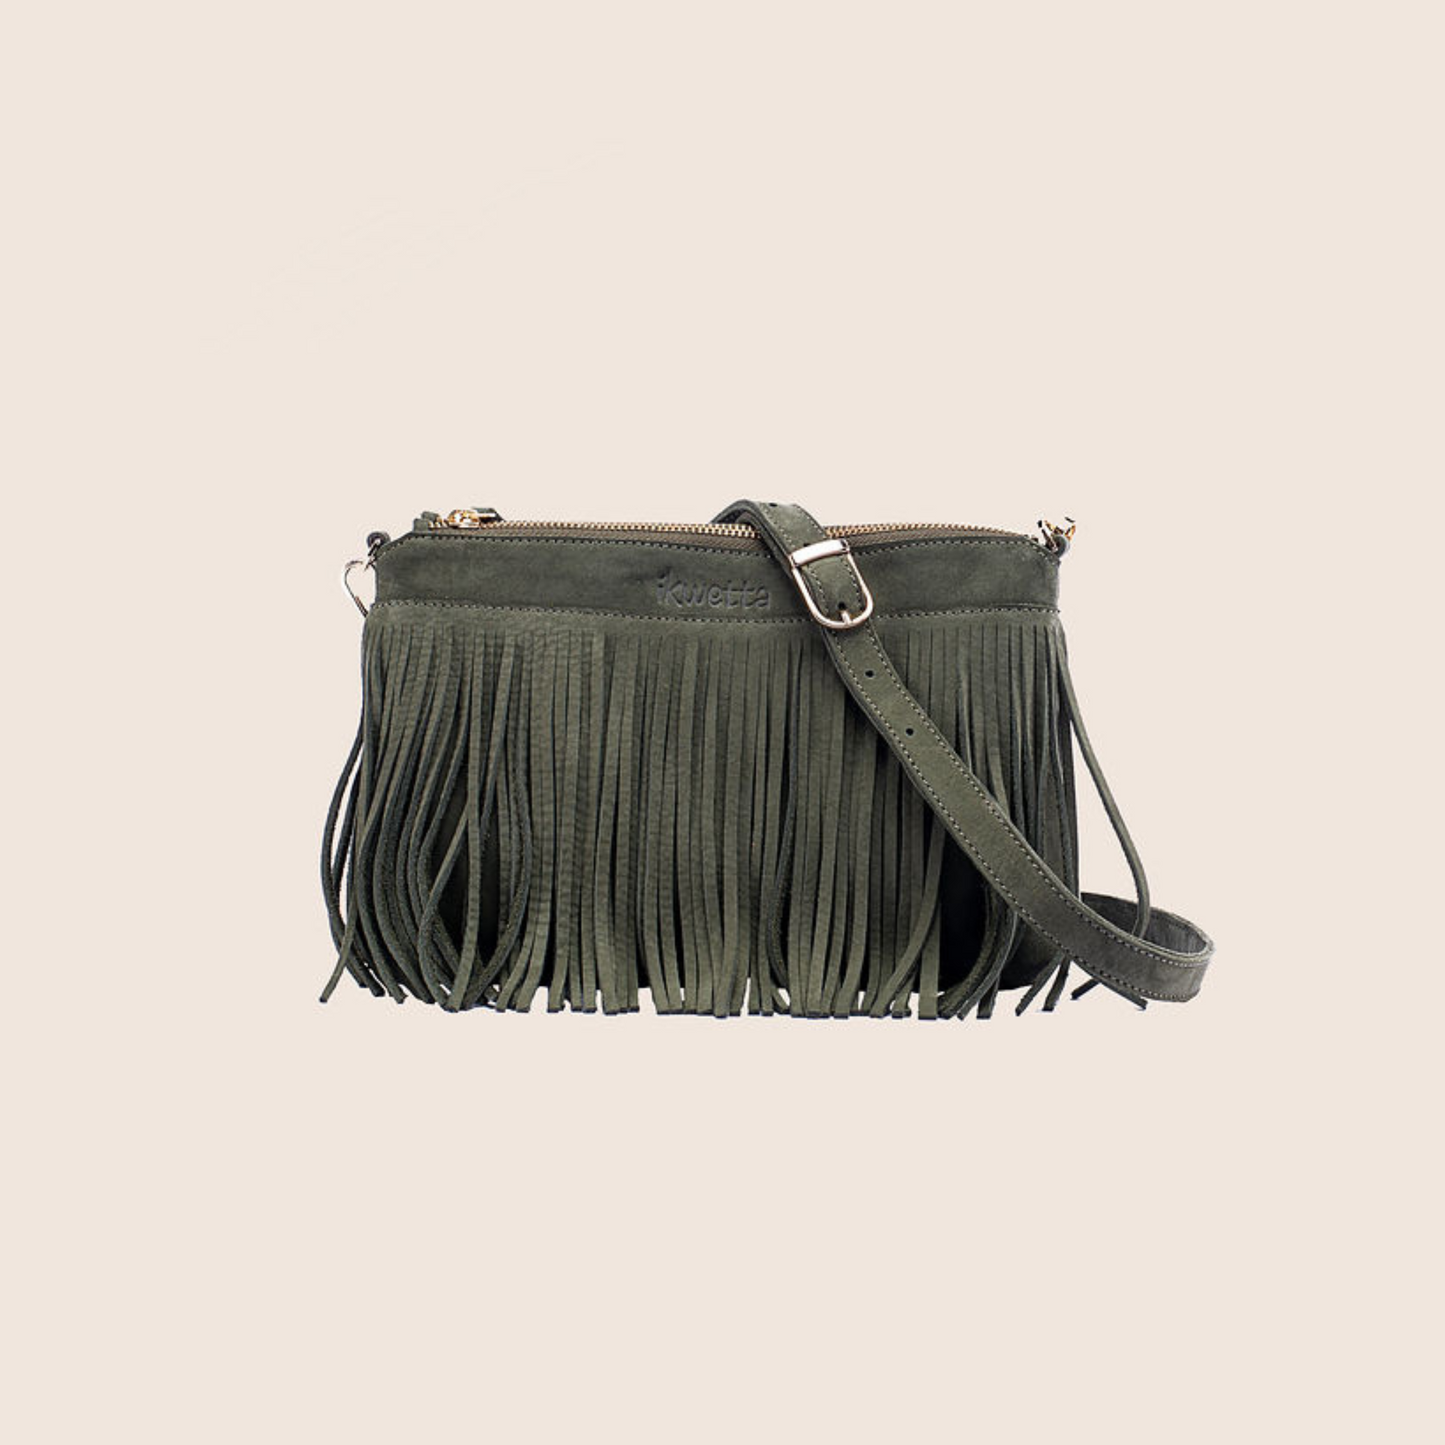 Fringe crossbody in olive hunting suede with adjustable crossbody strap